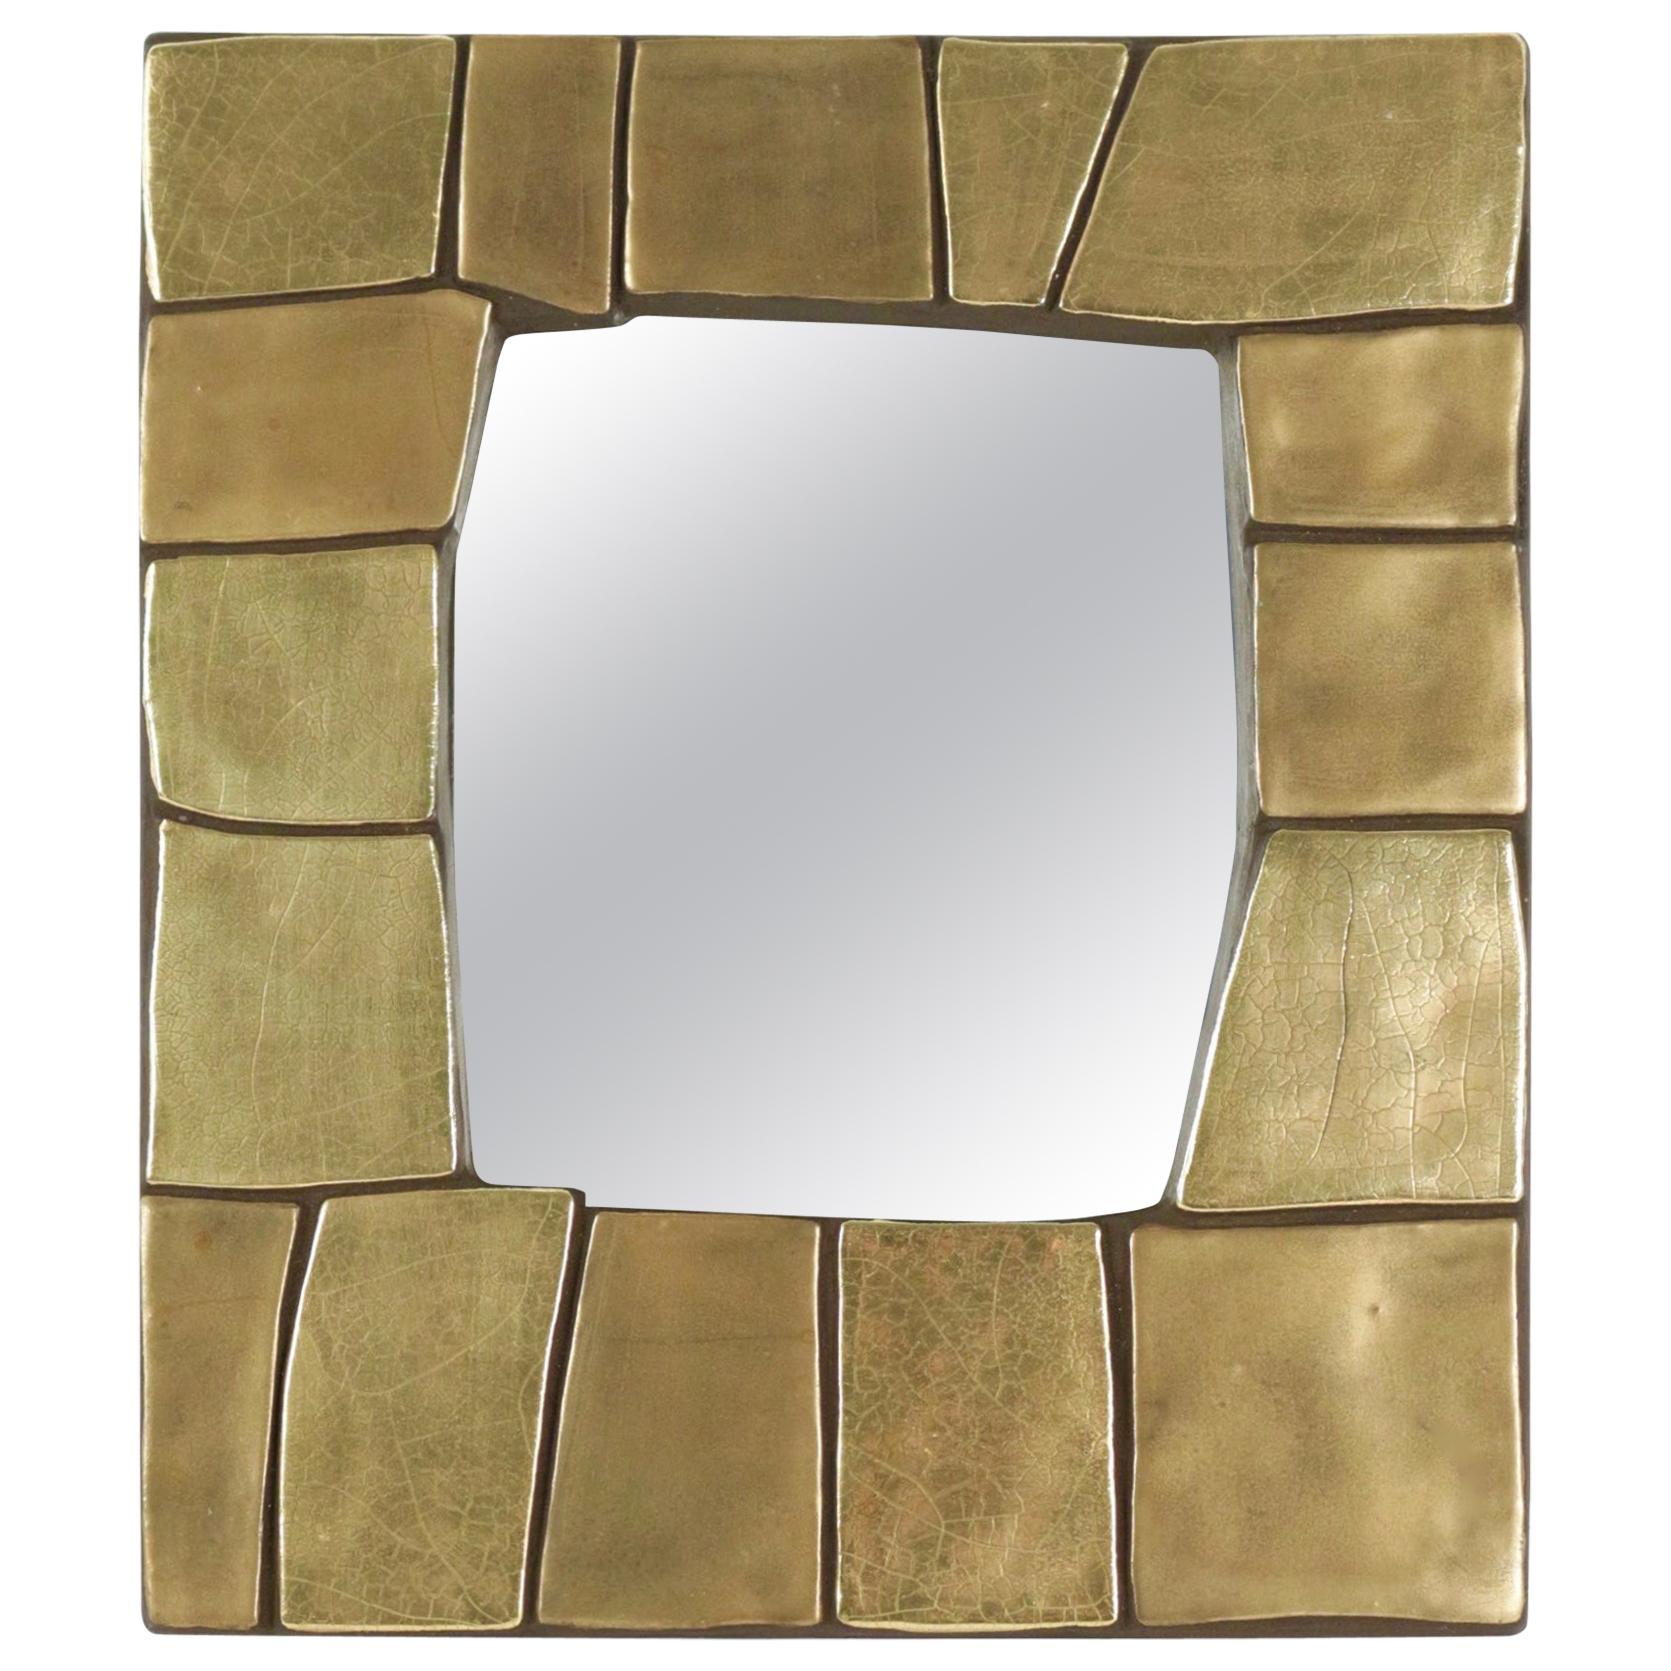 1960s Gilded and Enameled Ceramic Mirror, by Mithé Espelt